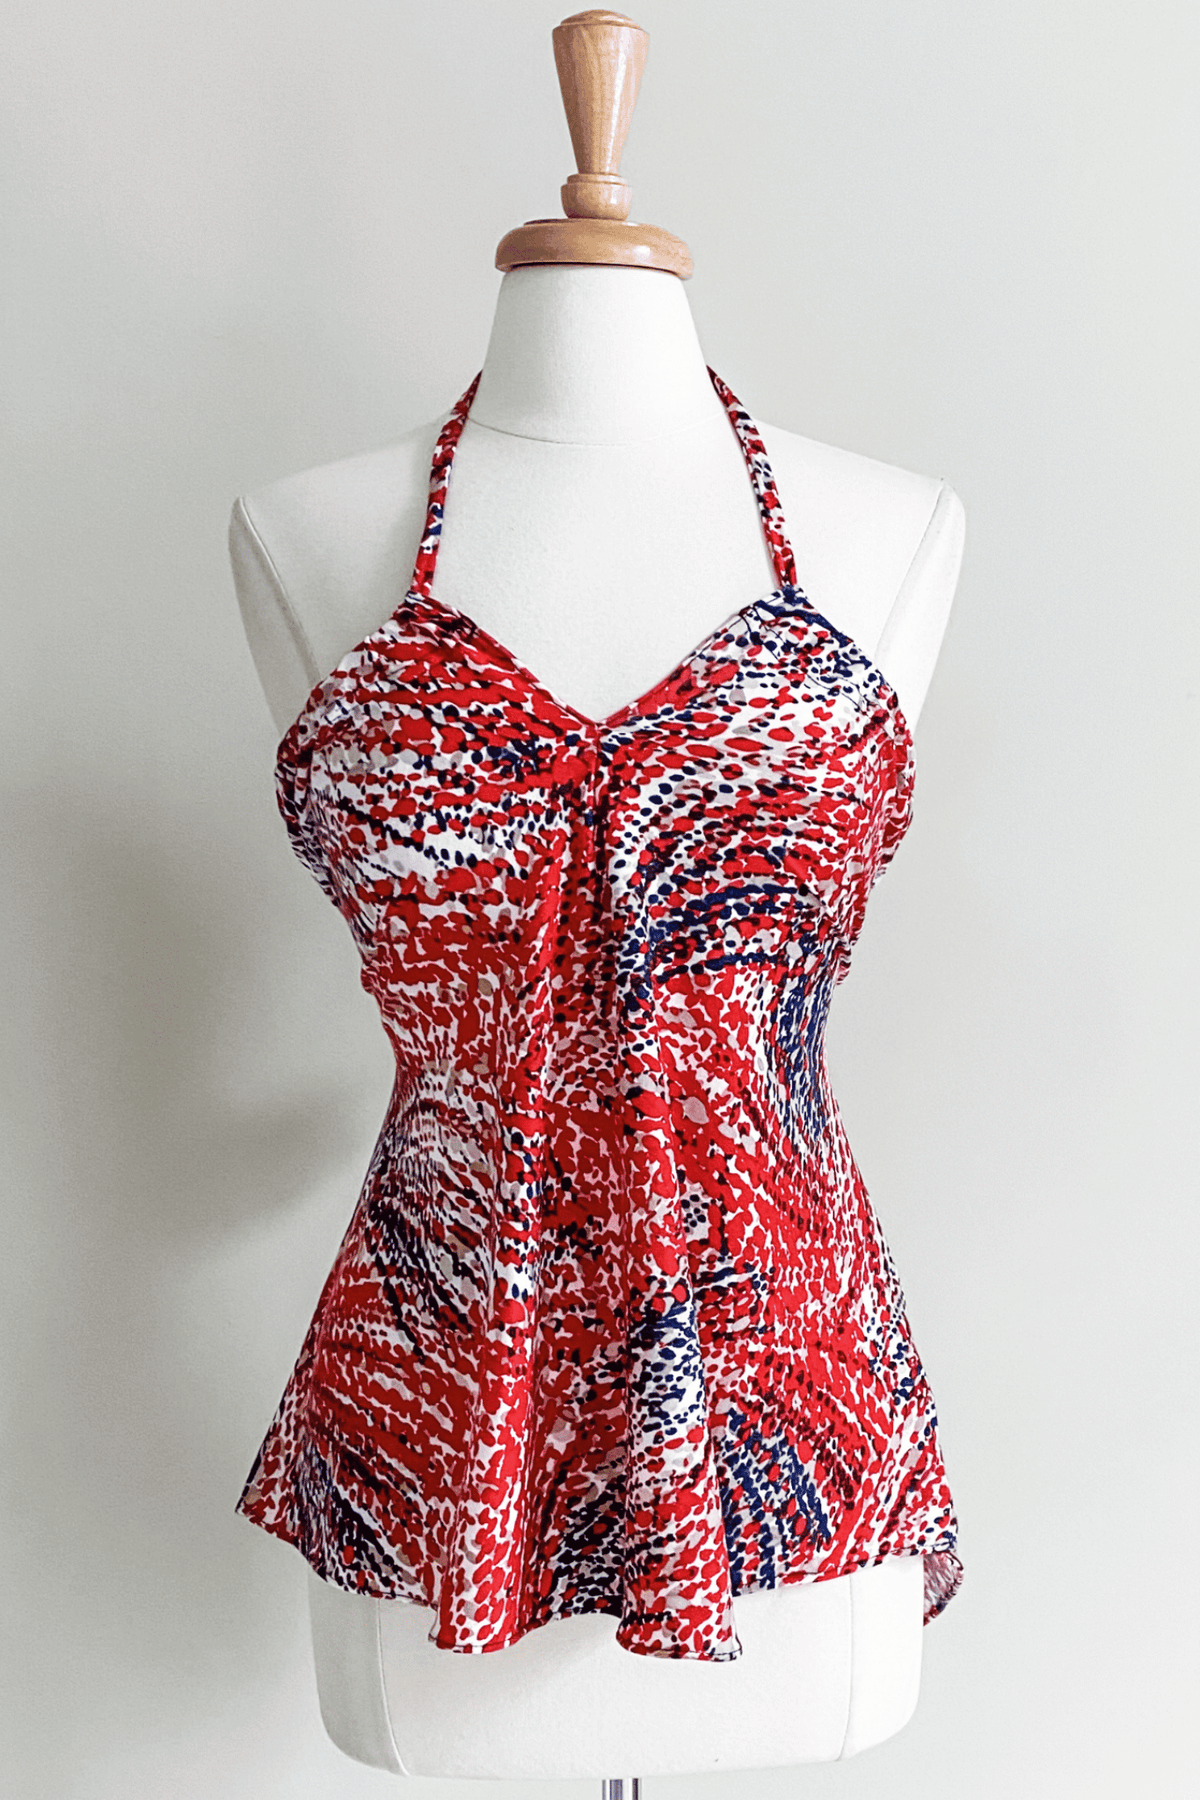 Diane Kroe Evermore Top (Red Navy) - Warm Weather Capsule Collection